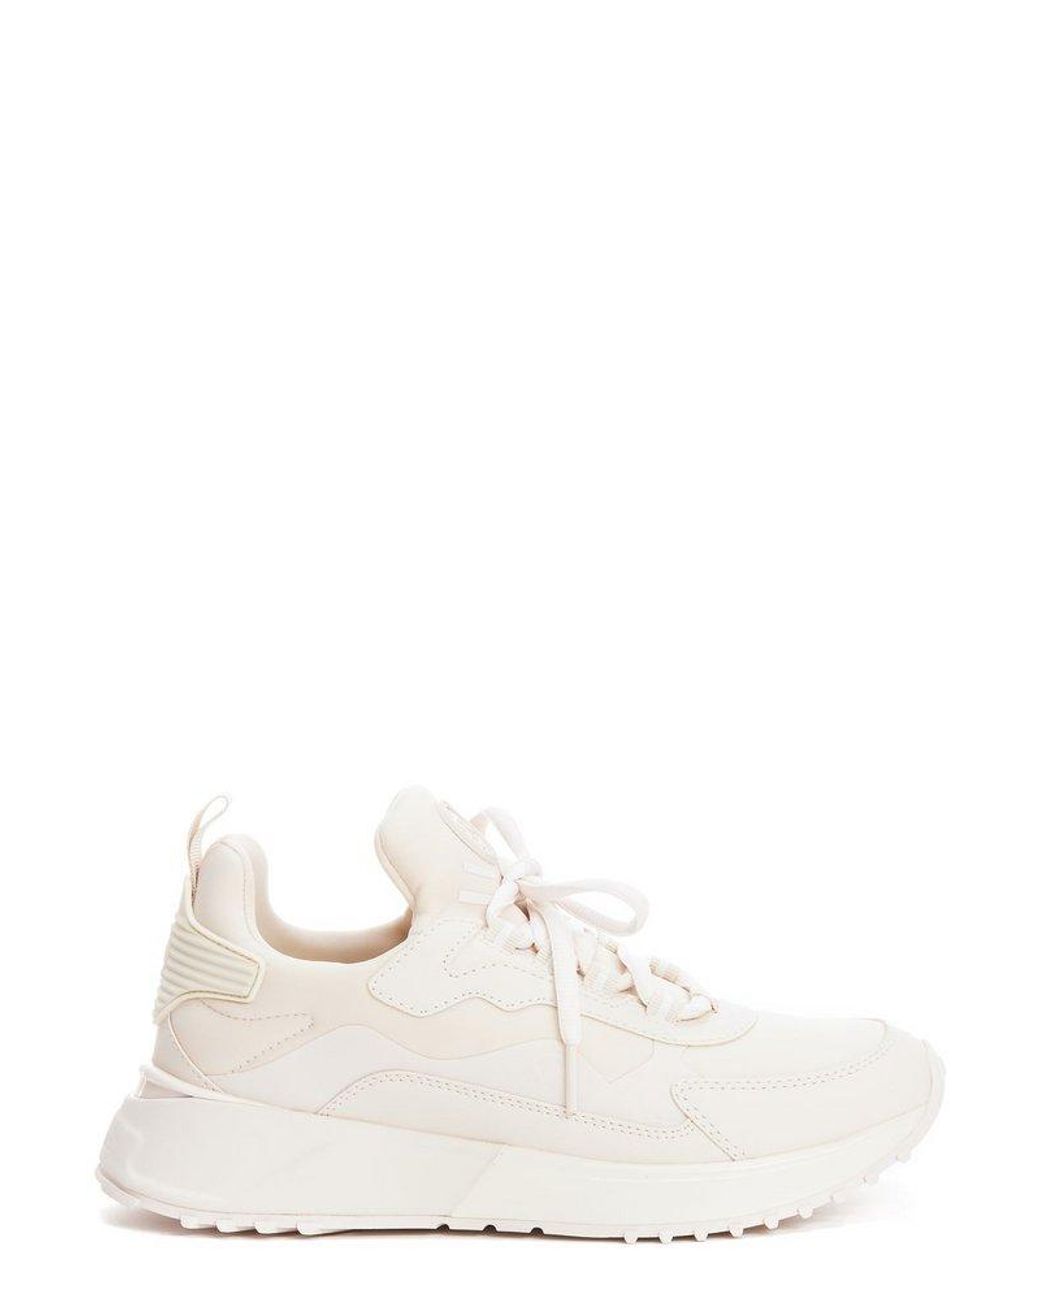 MICHAEL Michael Kors Theo Scuba Lace-up Sneakers in White | Lyst